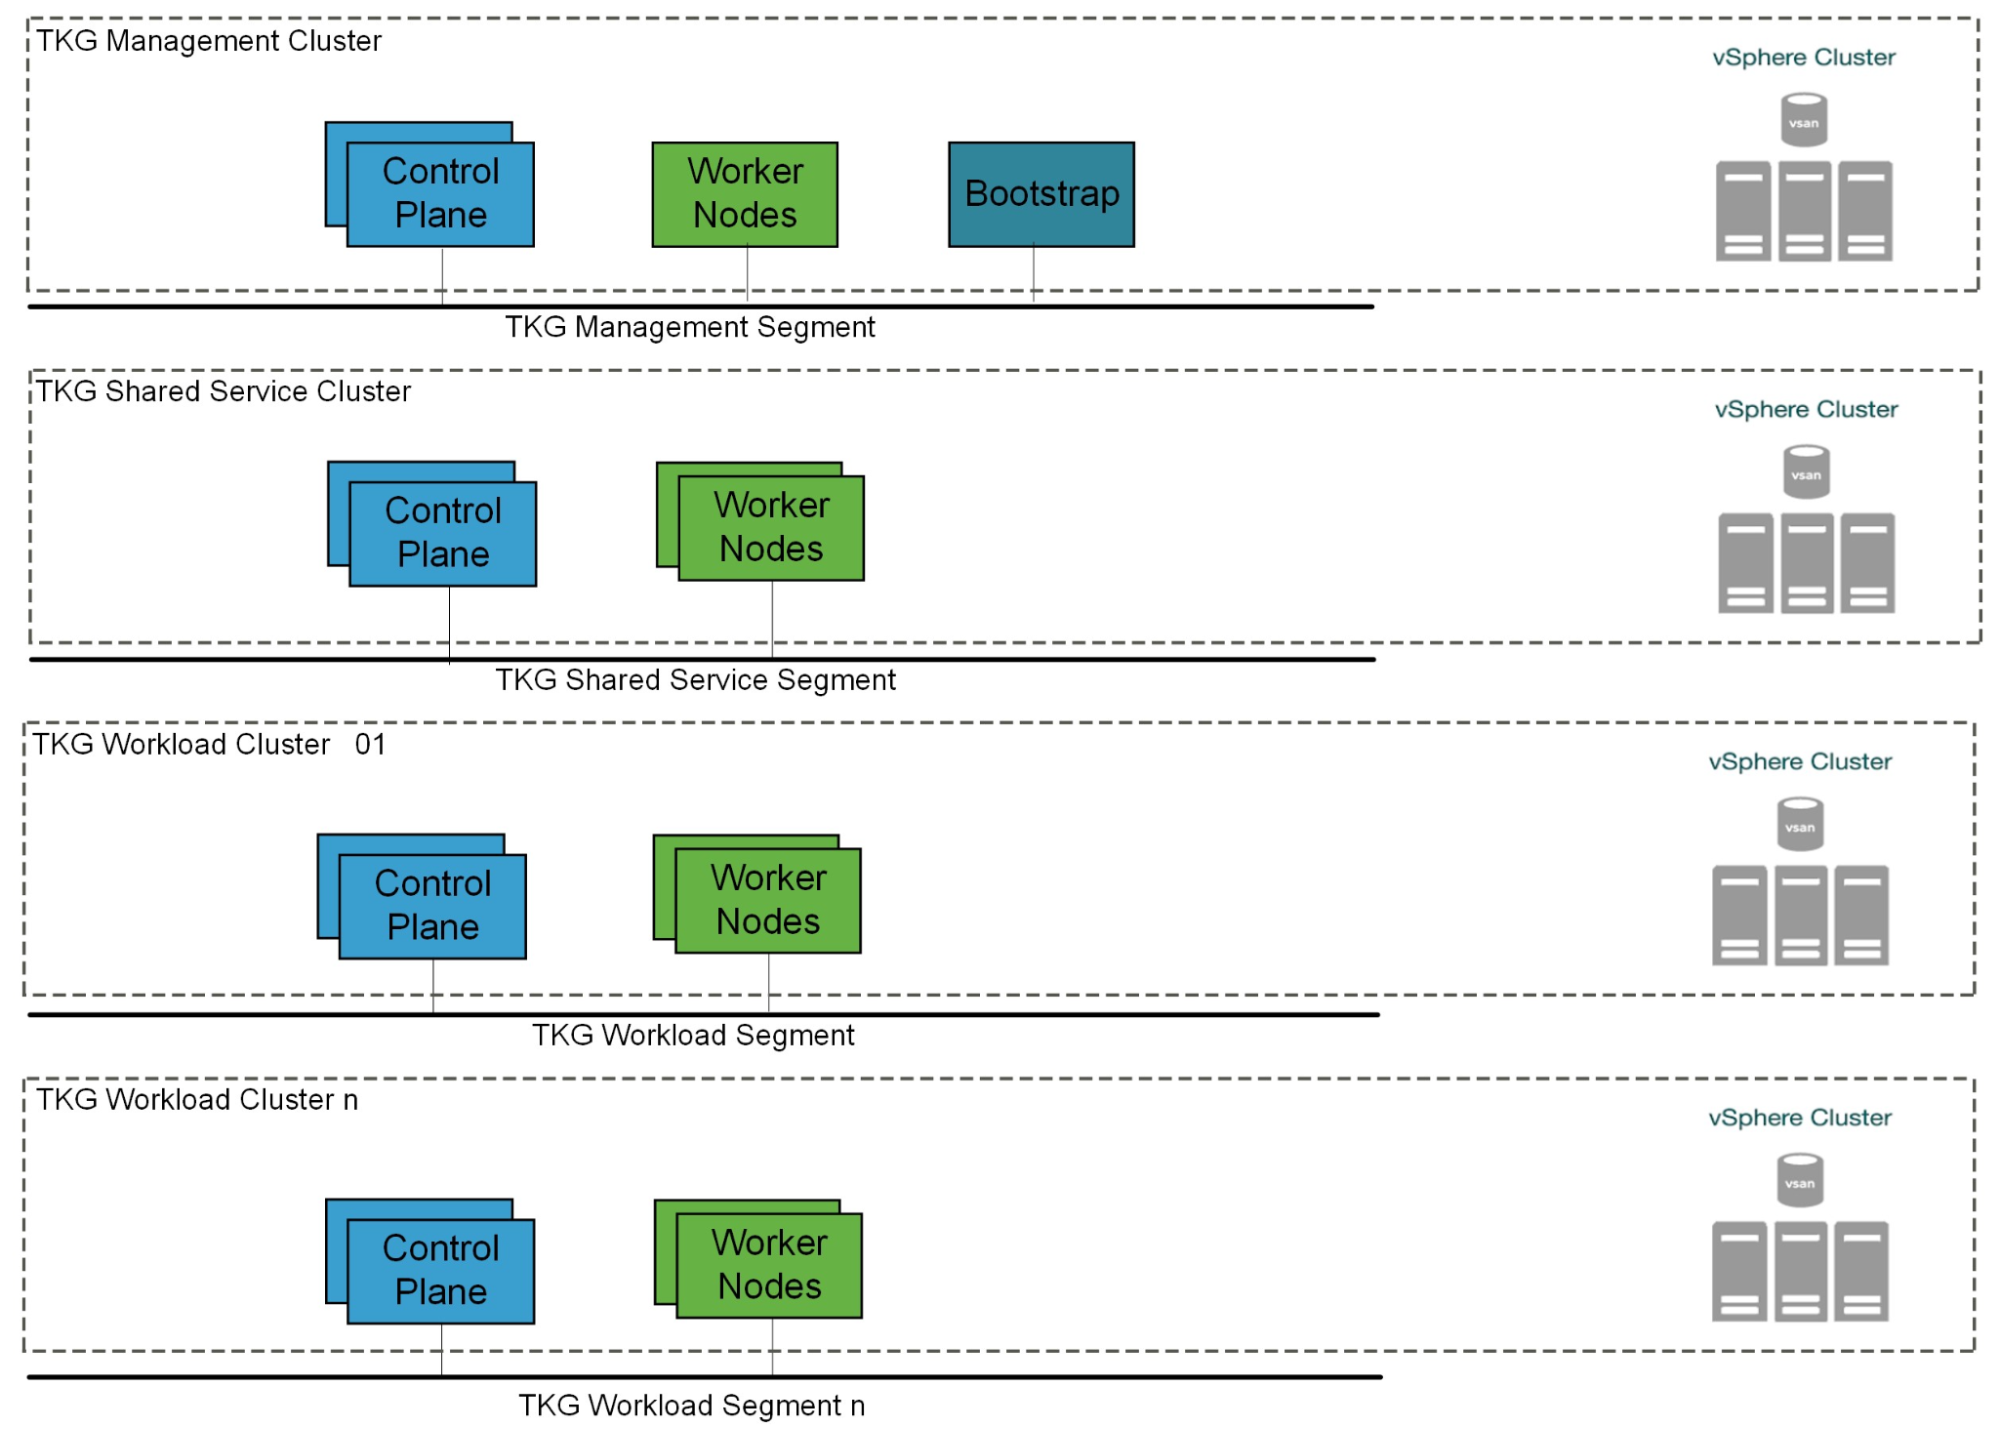 TKG Management and Workload clusters on different vSphere clusters